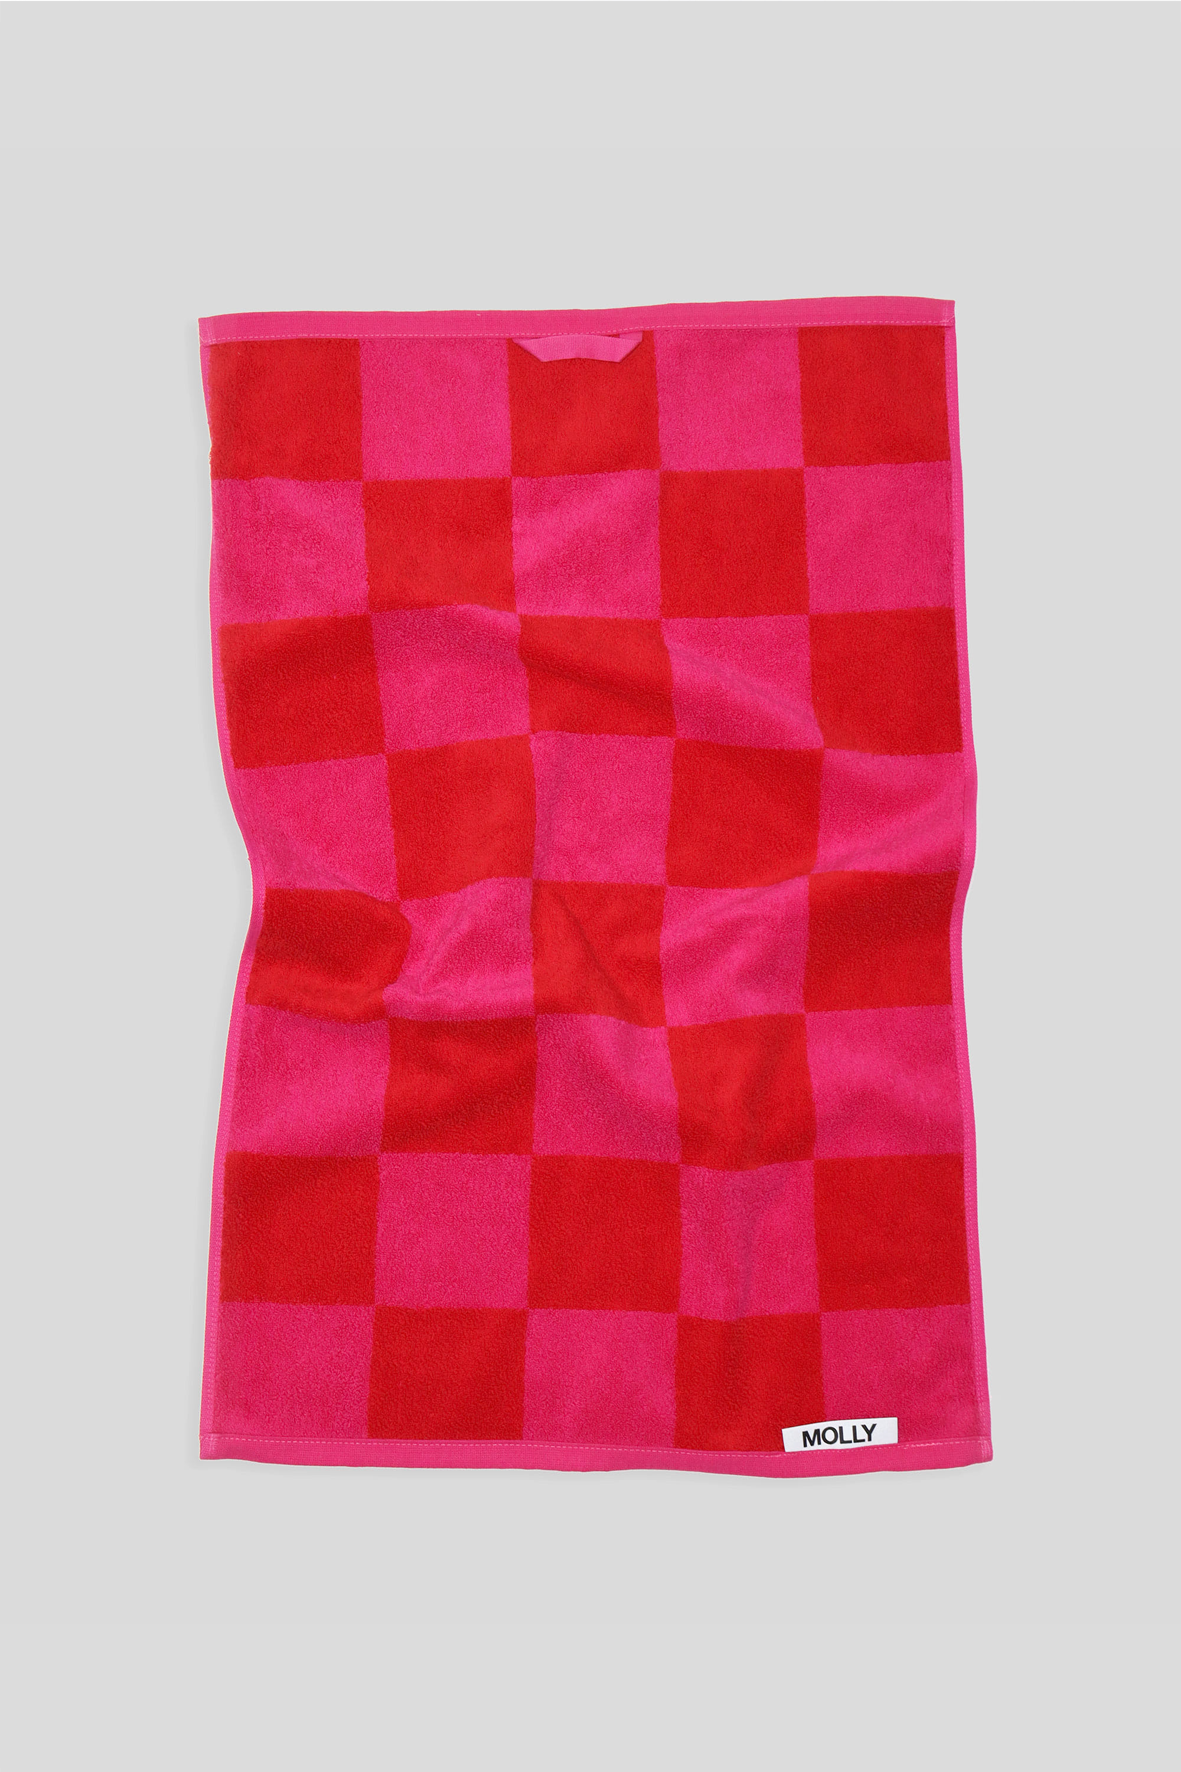 [MOLLY] Signature Towel, Pink Red